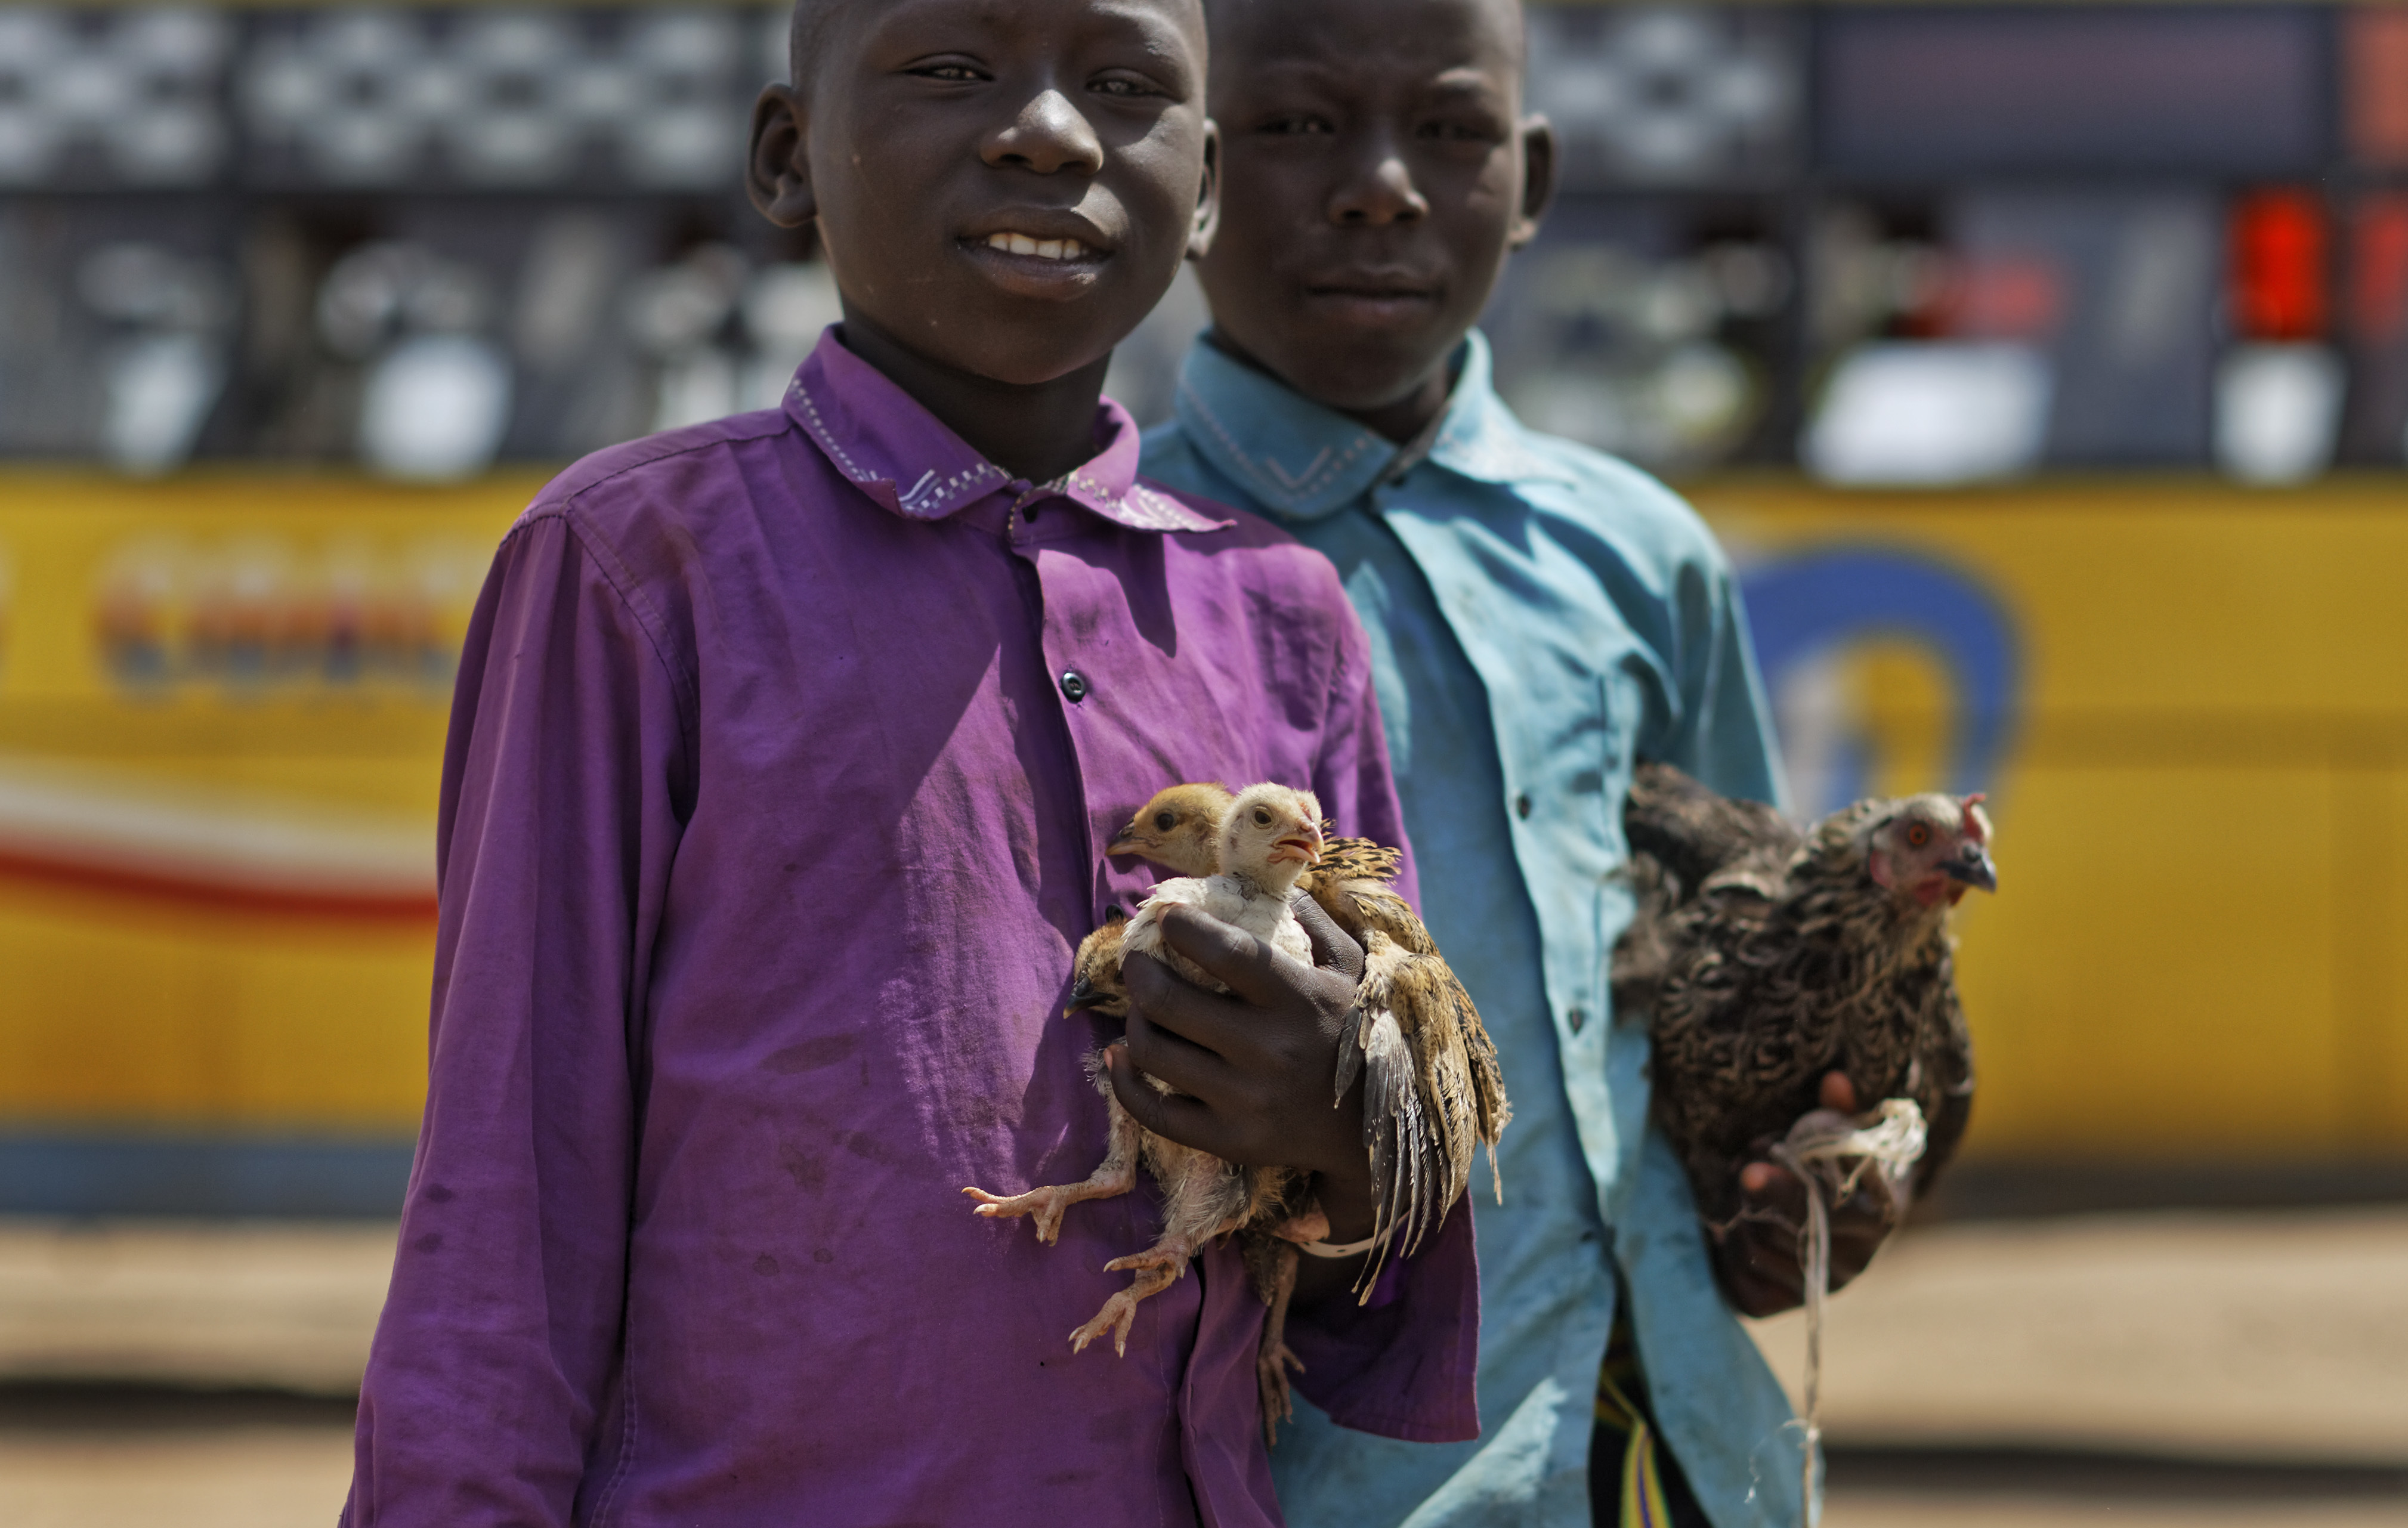 Two young South Sudanese refugee boys hold the chickens they brought with them, as they depart a bus bringing them to the Imvepi reception centre, where newly arrived refugees are processed before being allocated plots of land in nearby Bidi Bidi refugee settlement, in northern Uganda, Tuesday, June 6, 2017. Bidi Bidi is a sprawling complex of mud-brick houses that is now the world's largest refugee settlement holding some of those who fled the civil war in South Sudan, which has killed tens of thousands and driven out more than 1.5 million people in the past three years, creating the world's largest refugee crisis. (AP Photo/Ben Curtis)